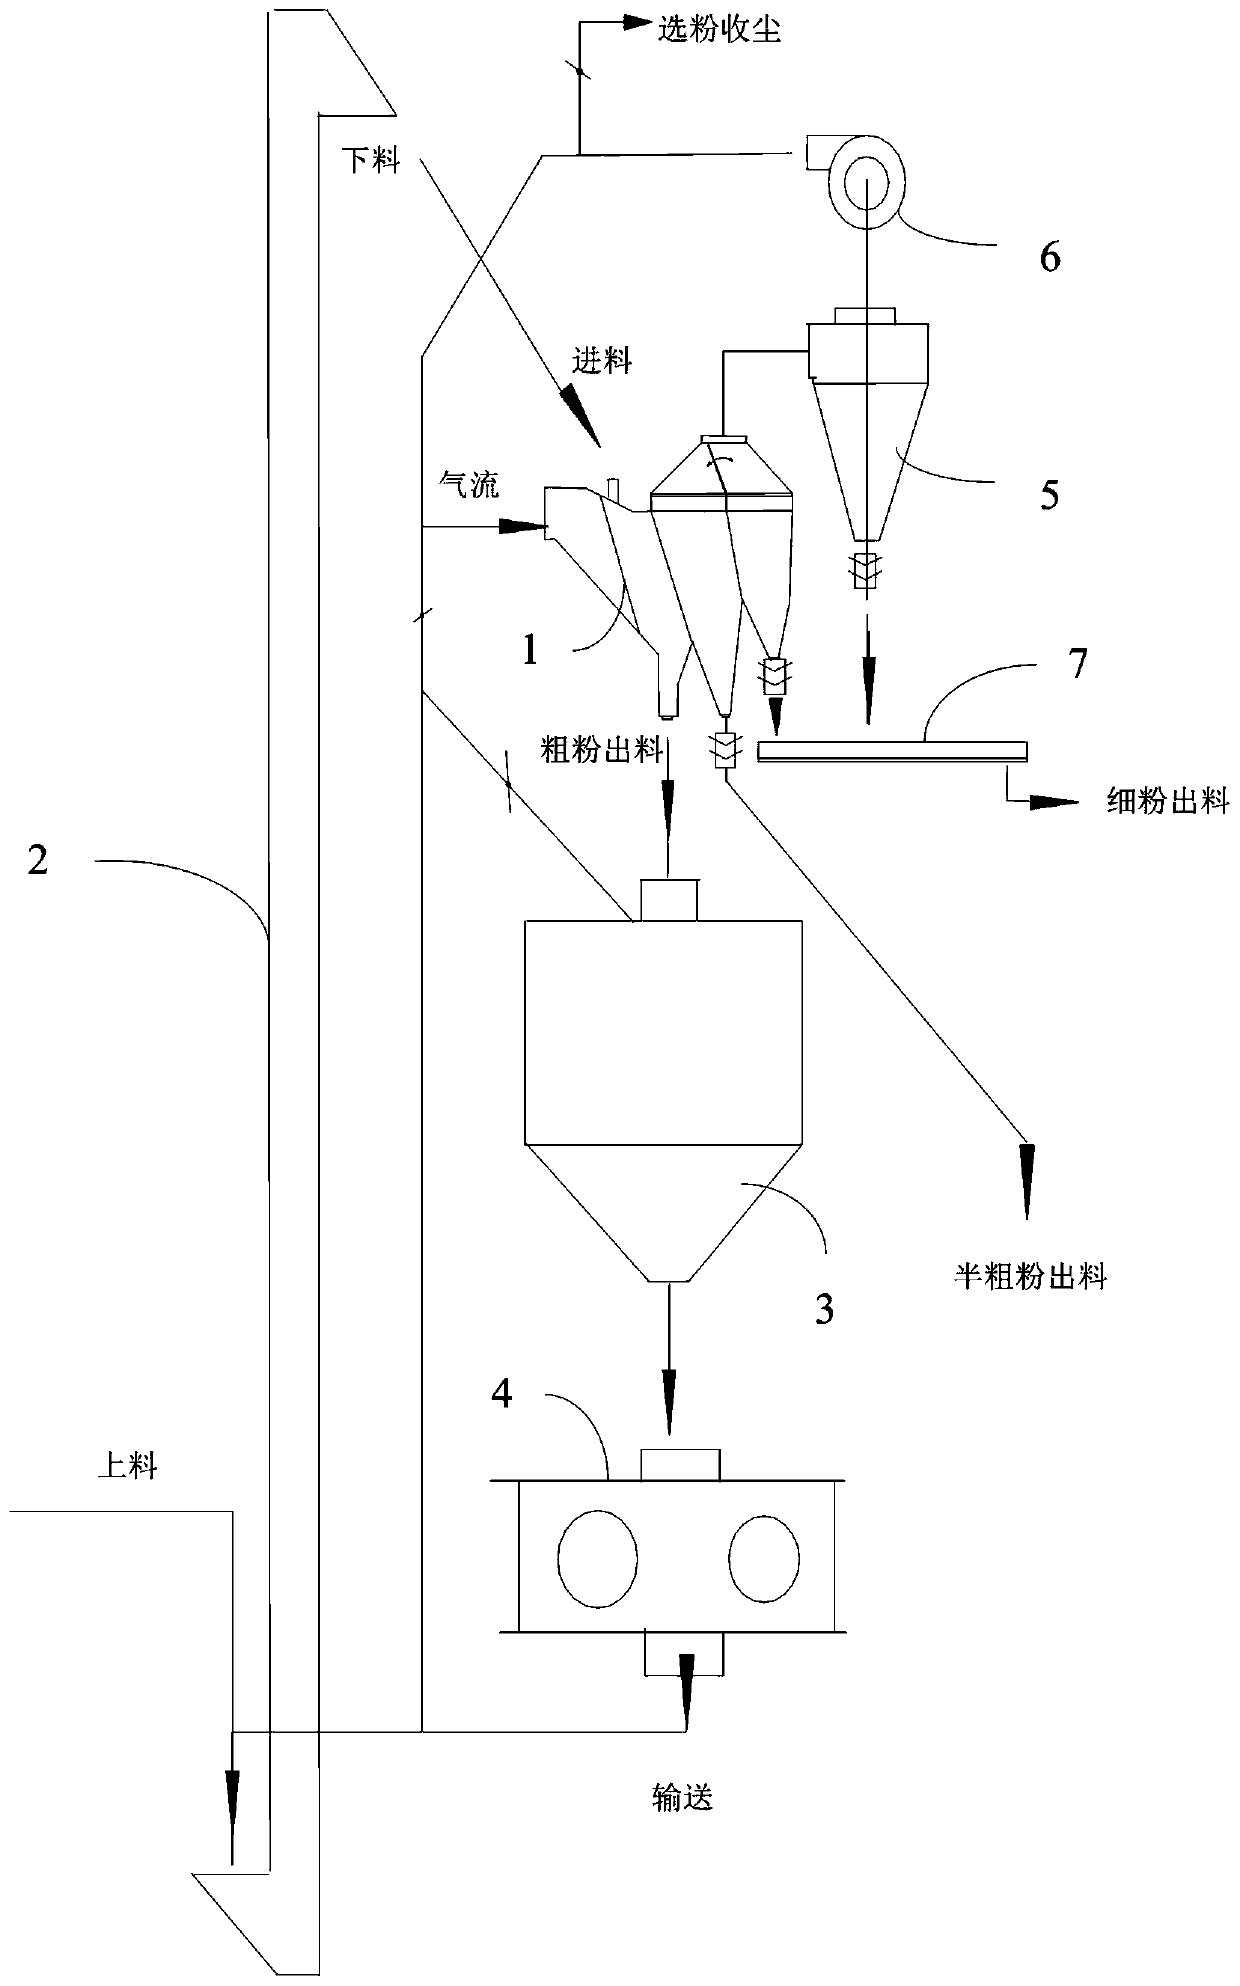 Static-state double-classification powder concentrator and semi-finished pre-grinding system